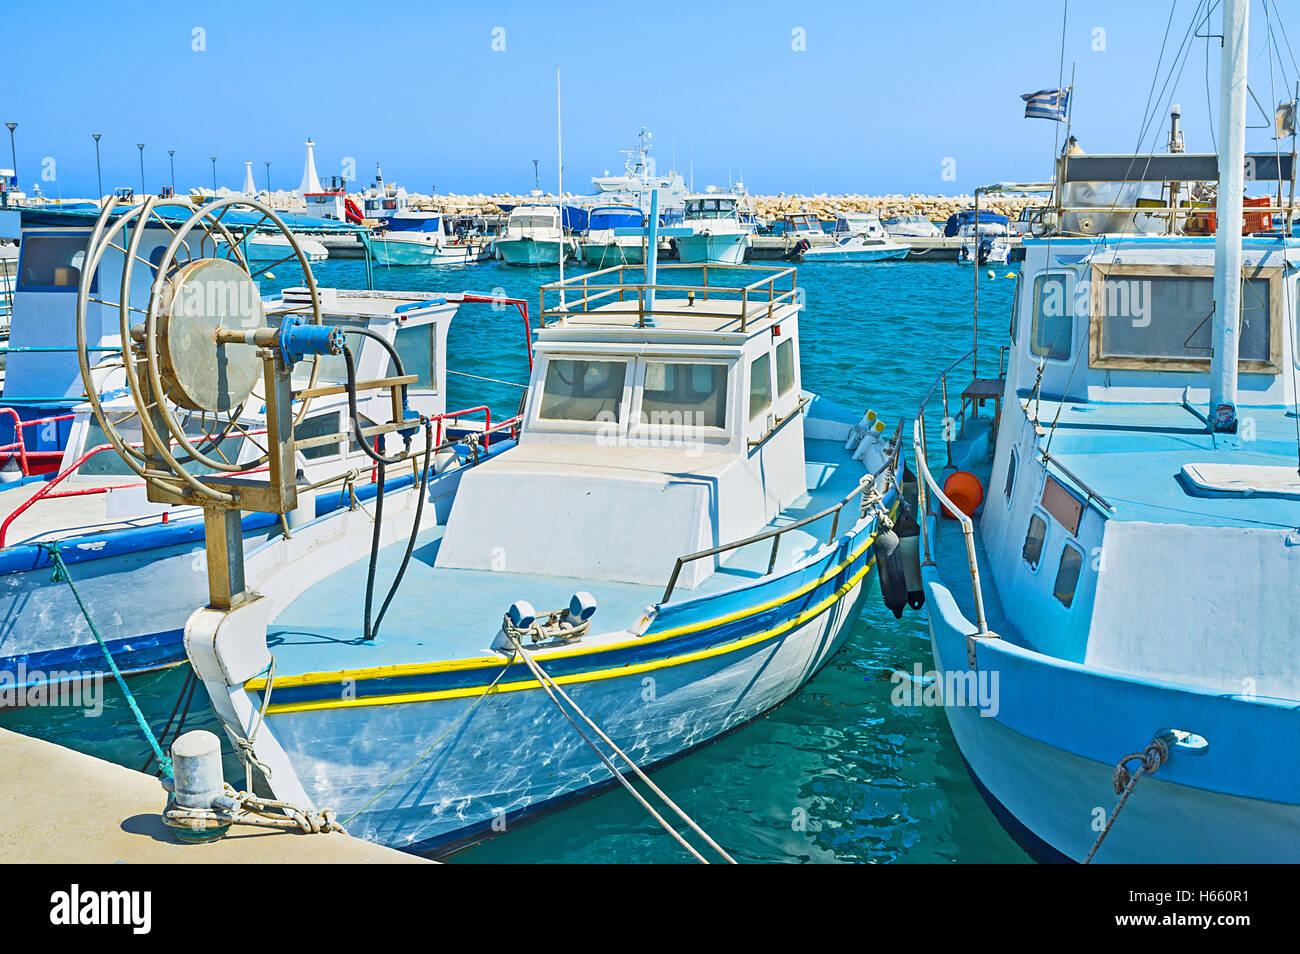 The Zugi village is the best place to hire a small boat, Cyprus. Stock Photo